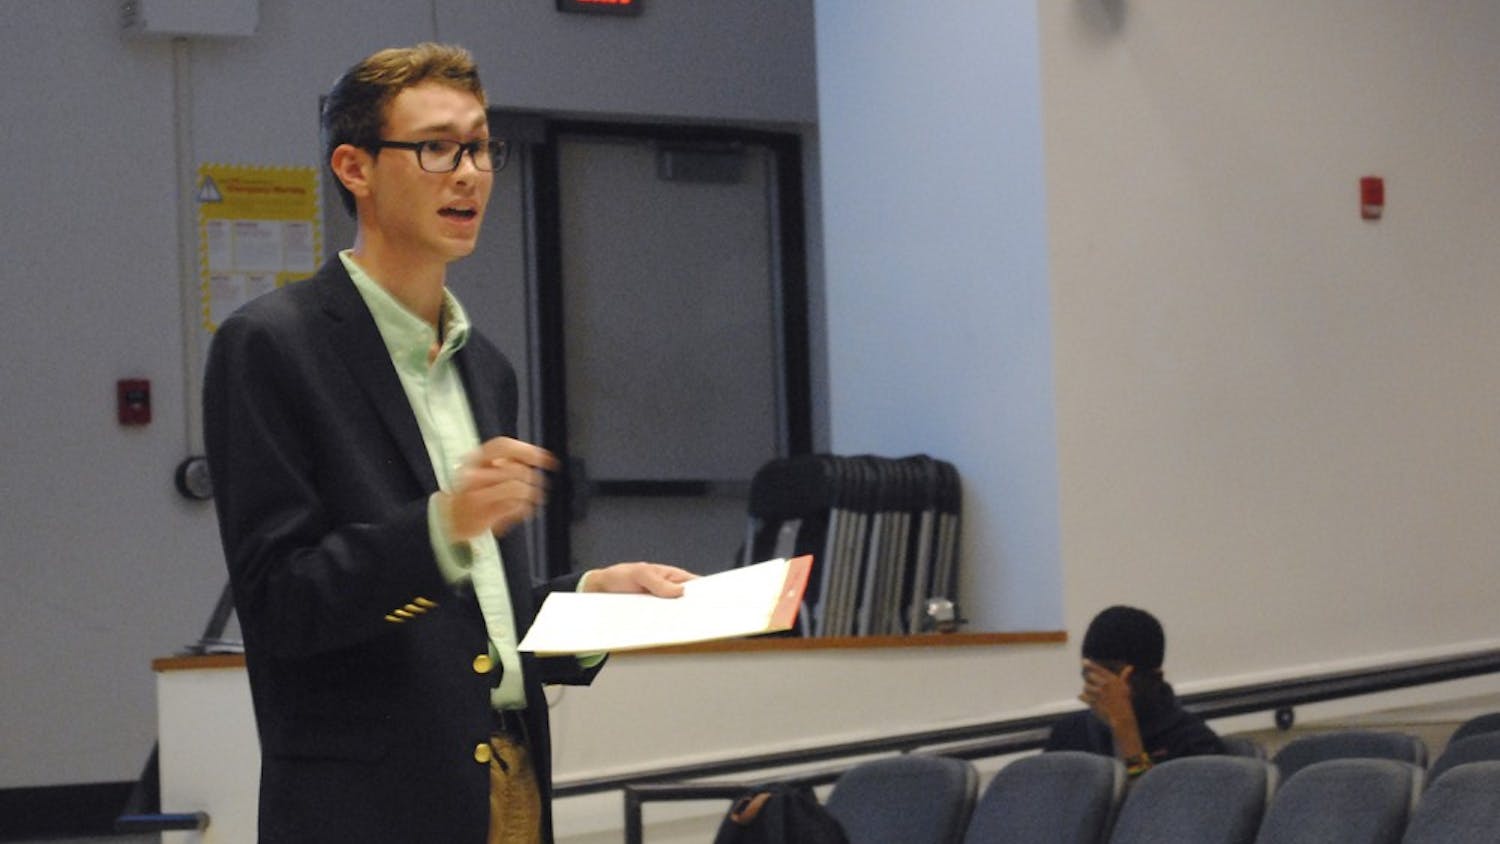 Graham Lowder, member of the Young Democrats, participates in a debate against the College Republicans on Wednesday. The teams discussed issues including climate change, immigration, and higher education. 